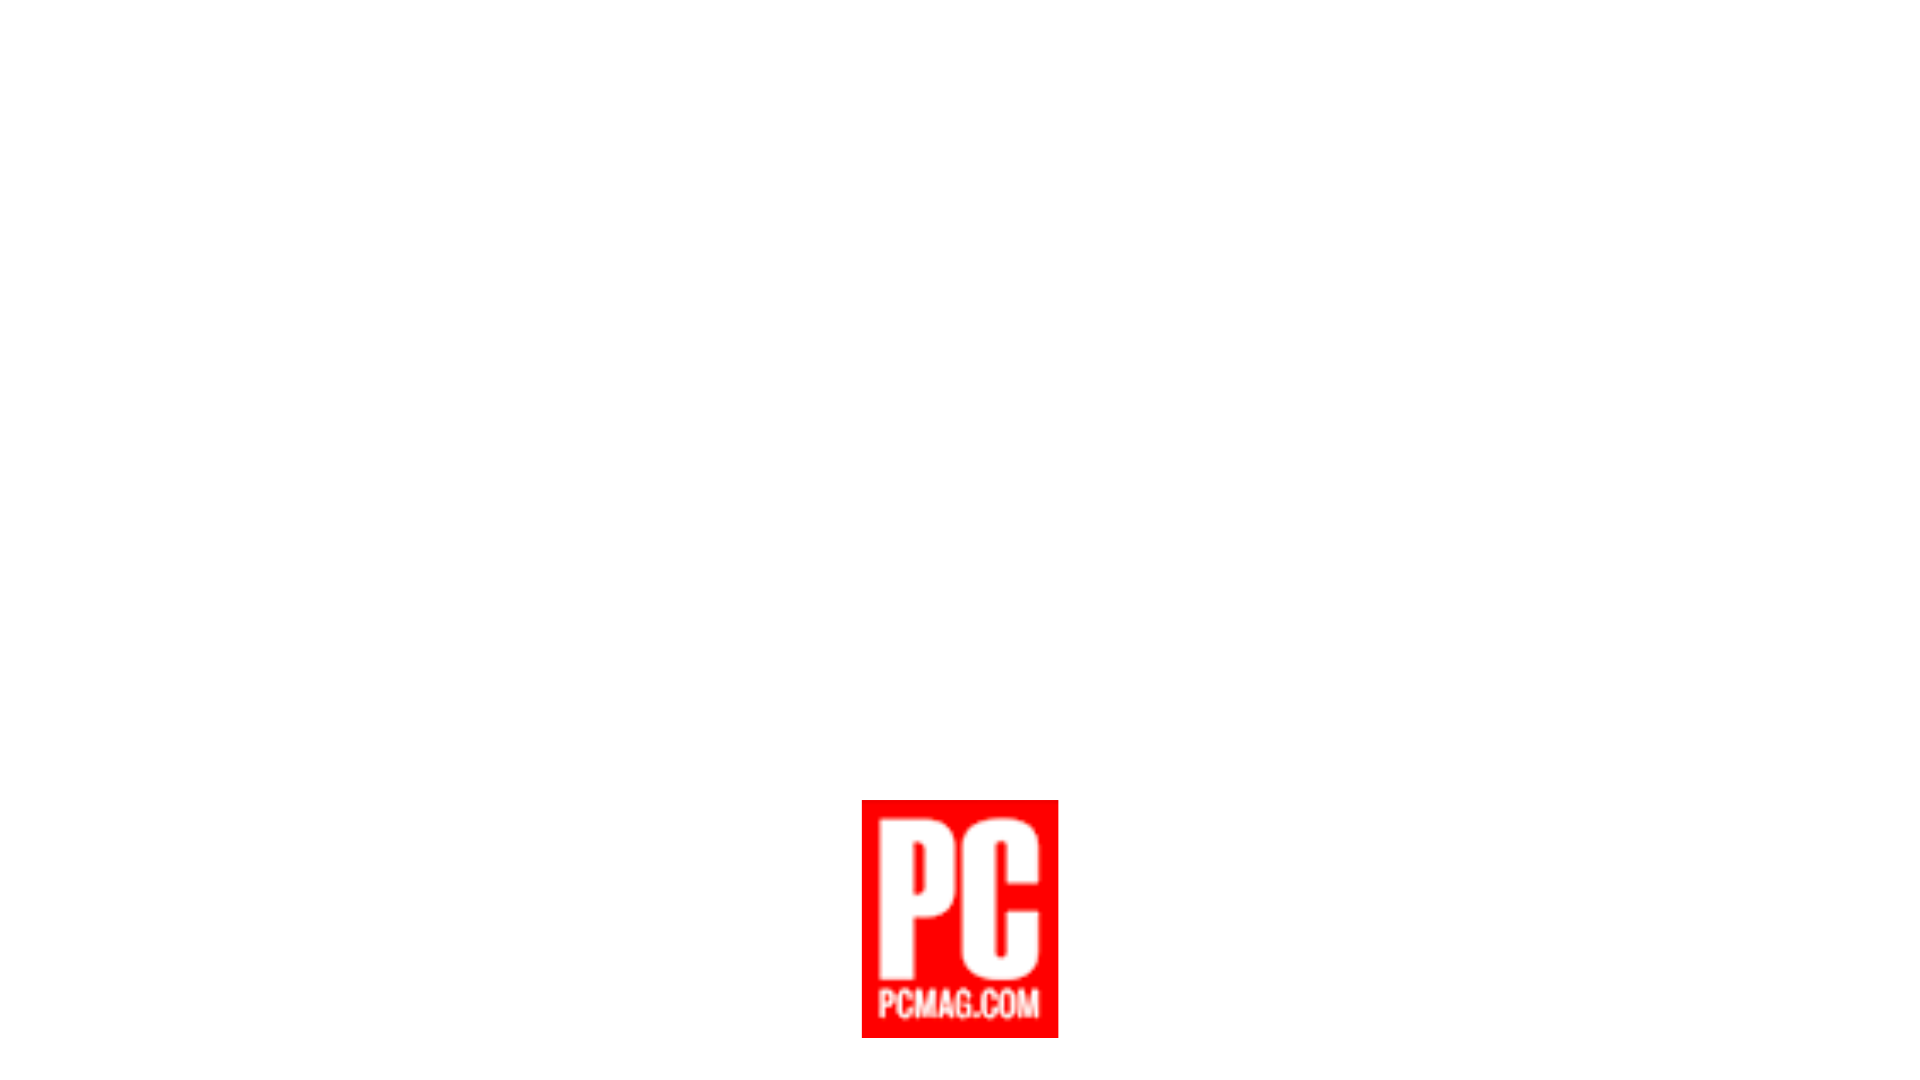 A white background with a red pc logo on it